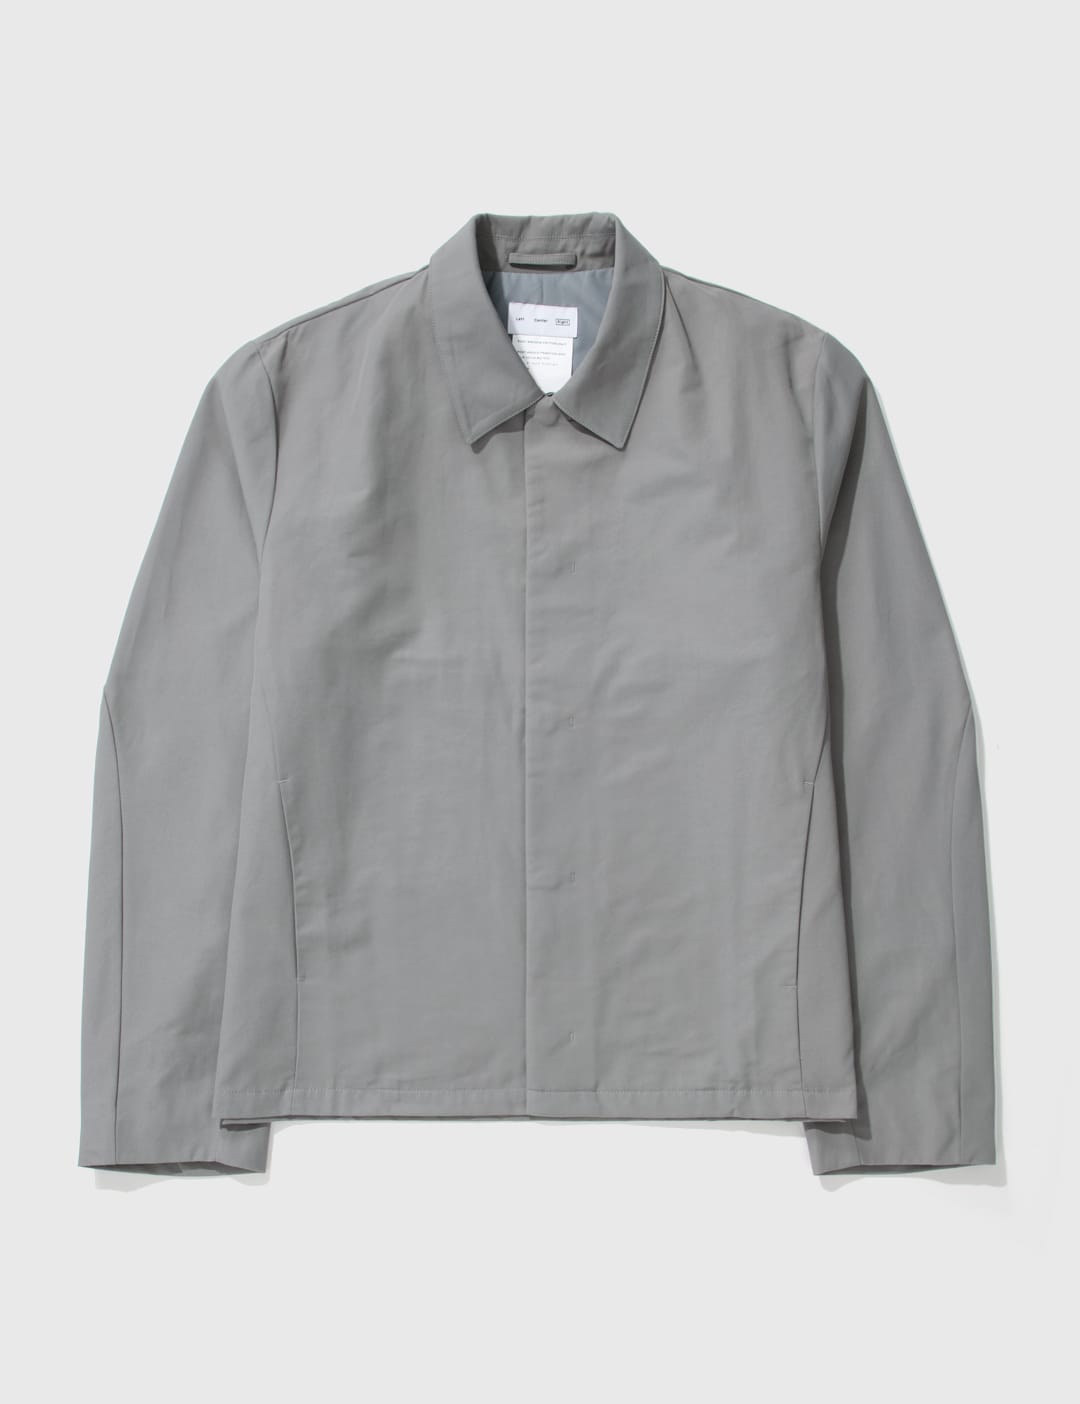 POST ARCHIVE FACTION (PAF) - 5.0 JACKET RIGHT | HBX - Globally 